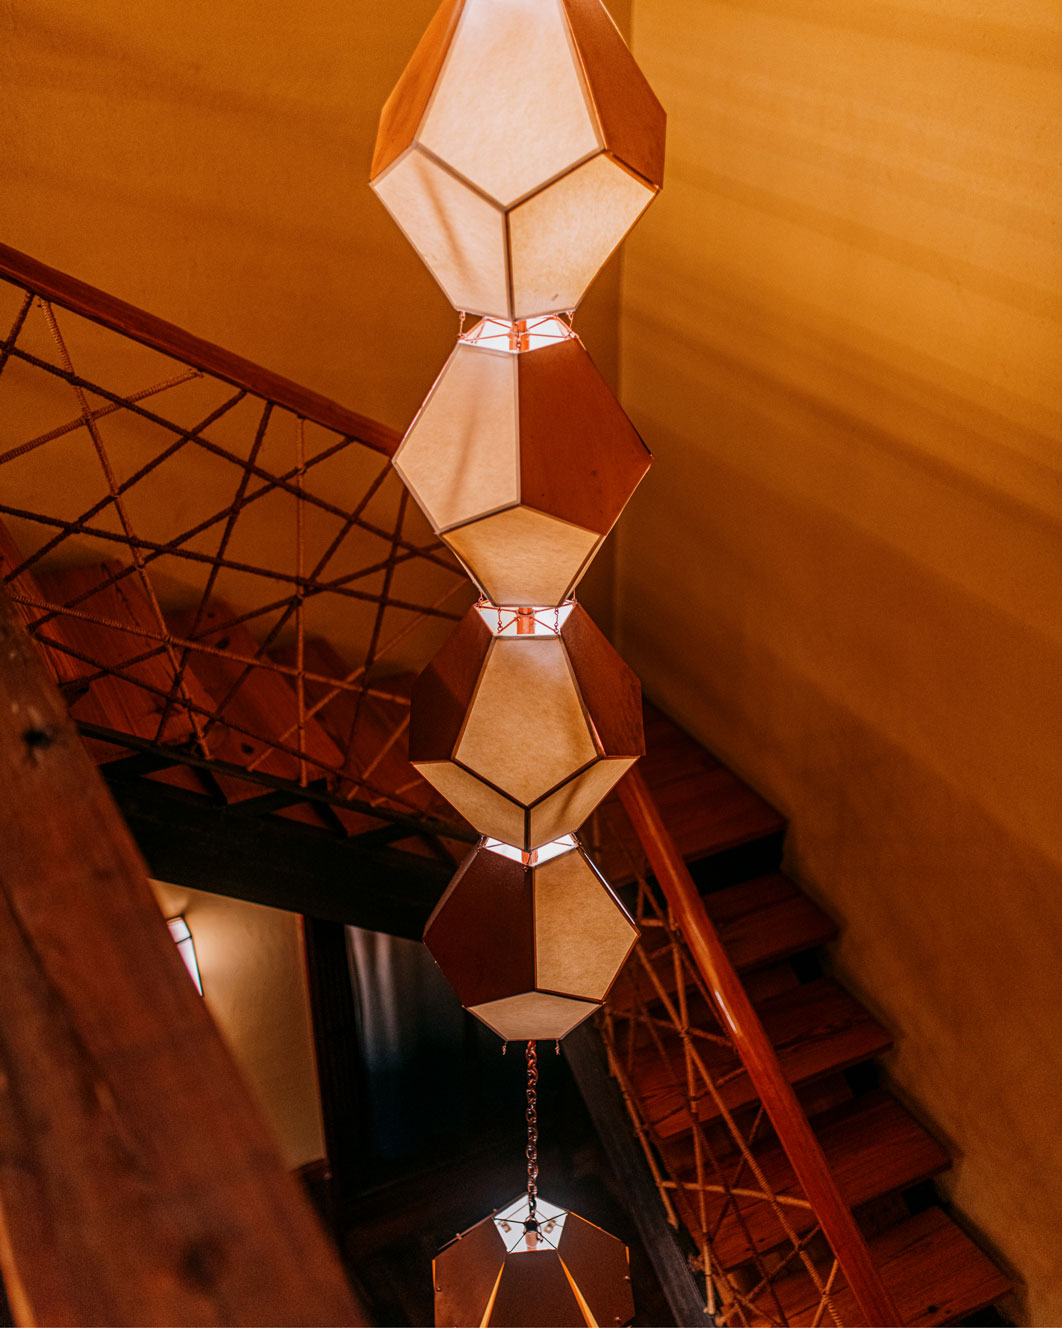 Chandelier in the enter of wooden staircase